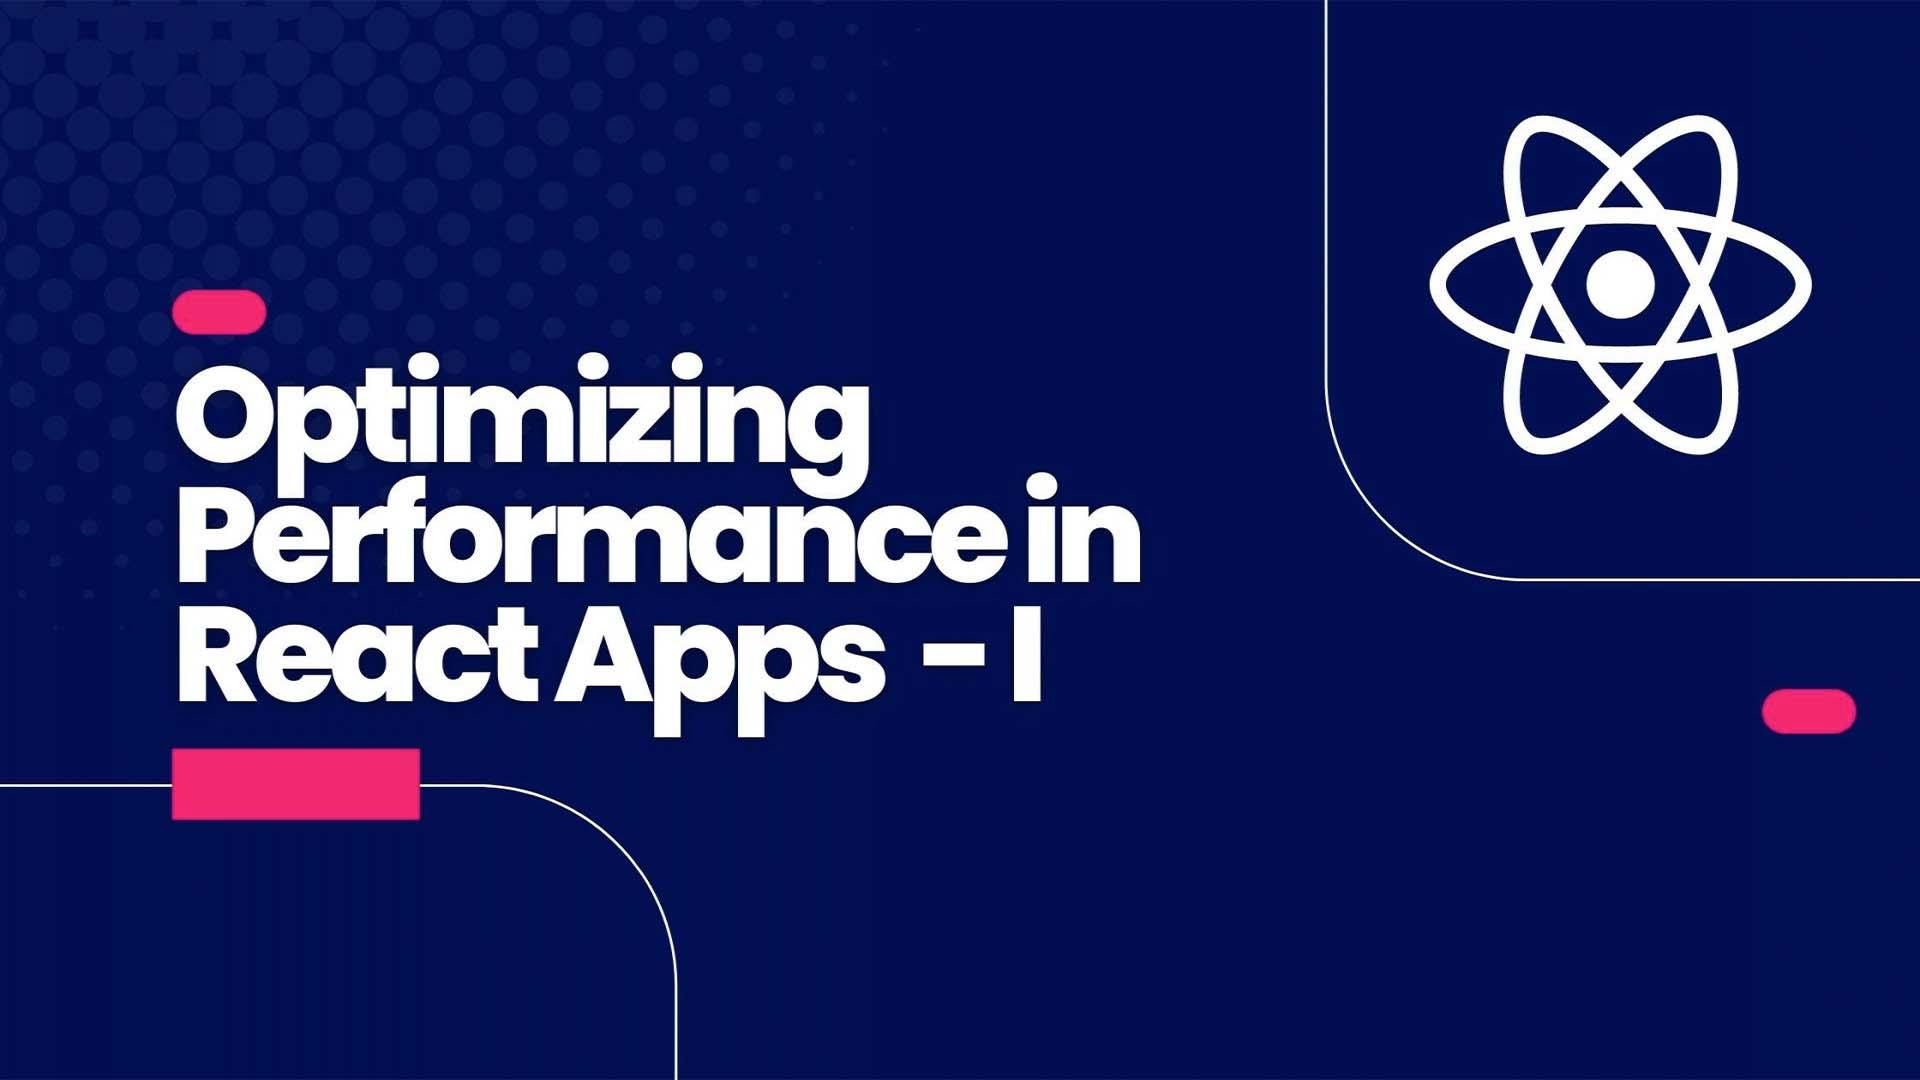 Optimizing Performance in React Apps - I